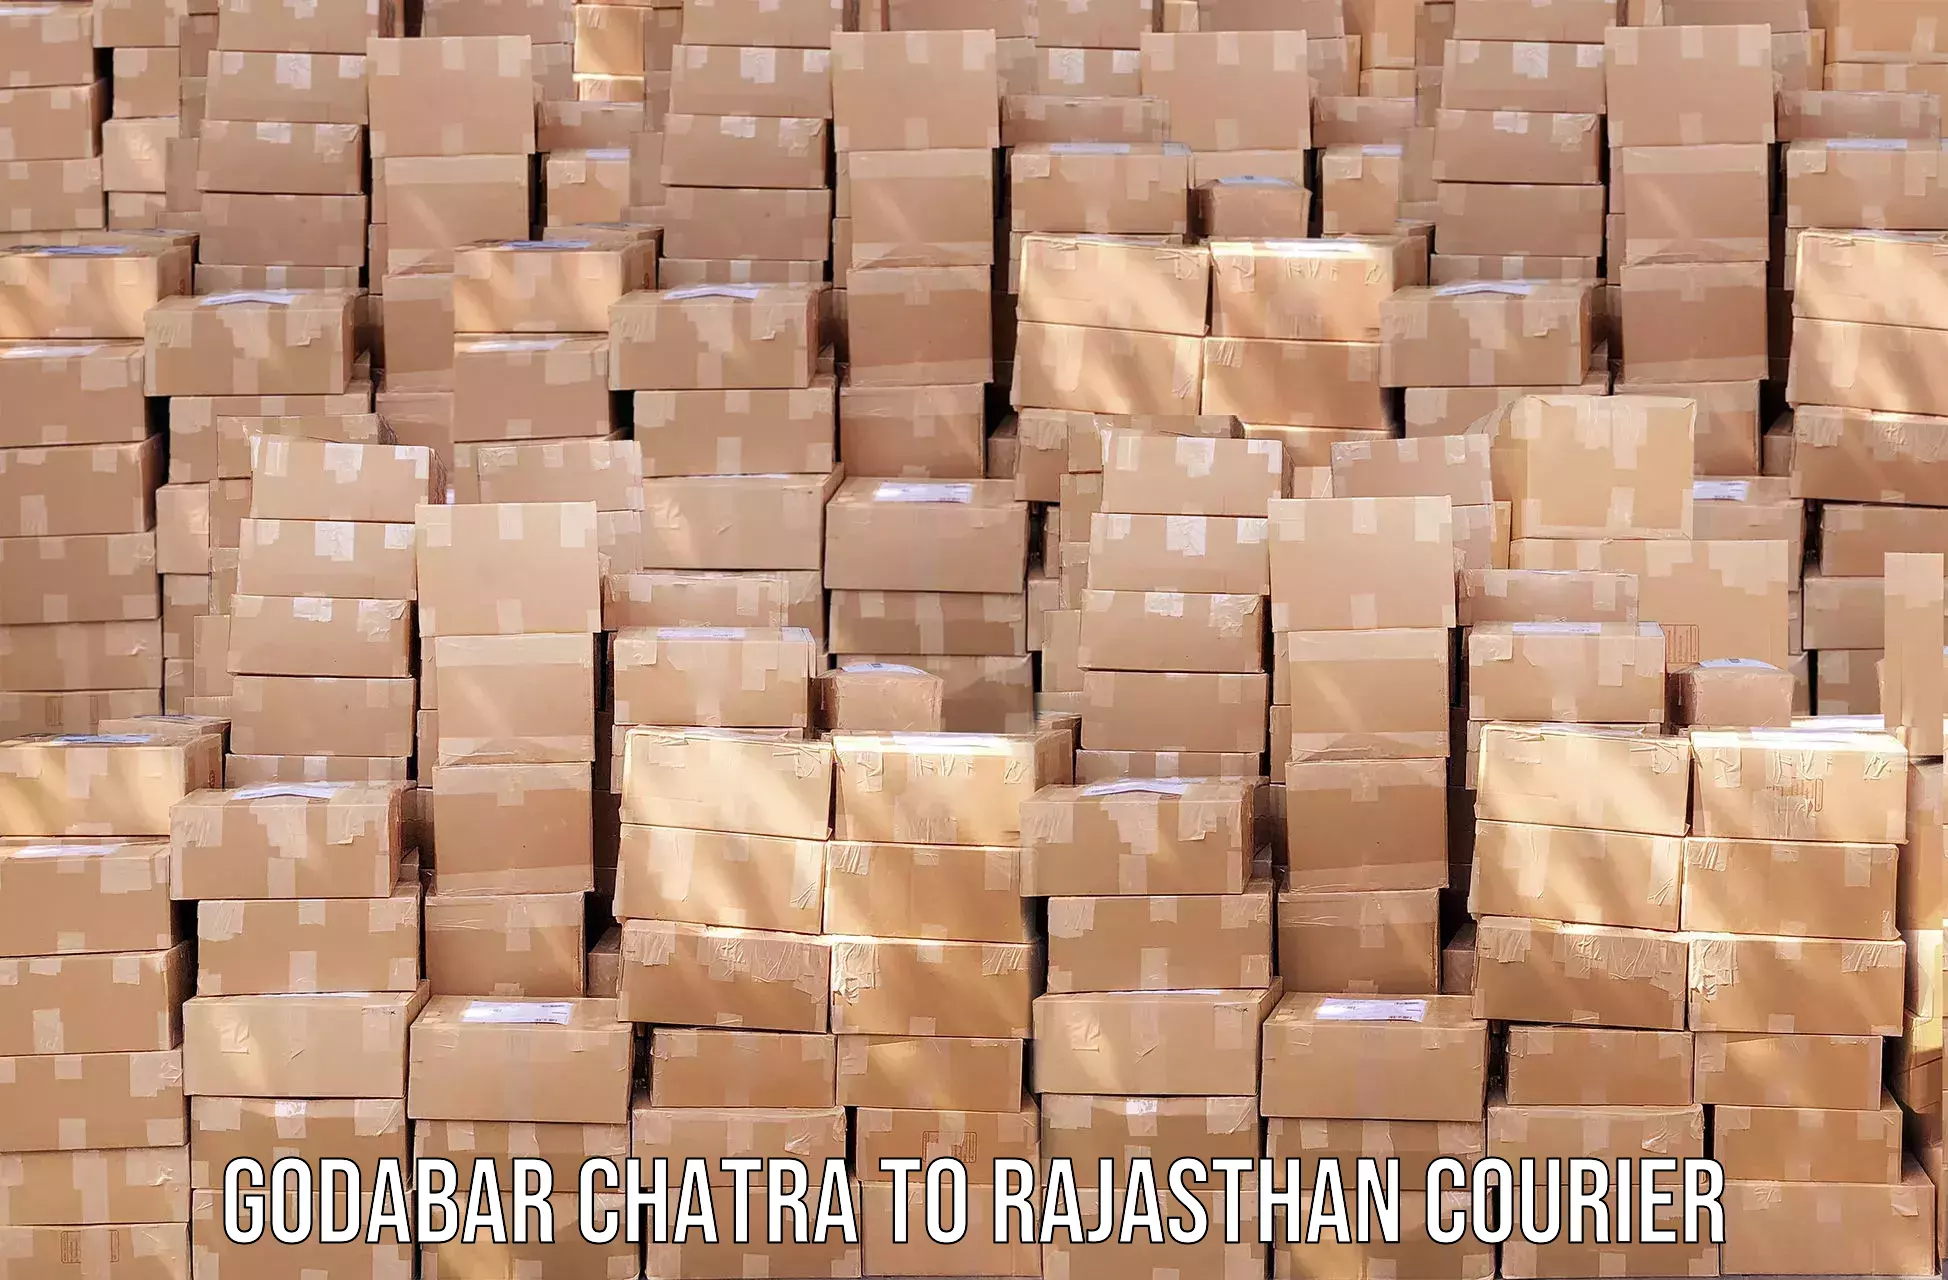 Efficient courier operations Godabar Chatra to Badnor